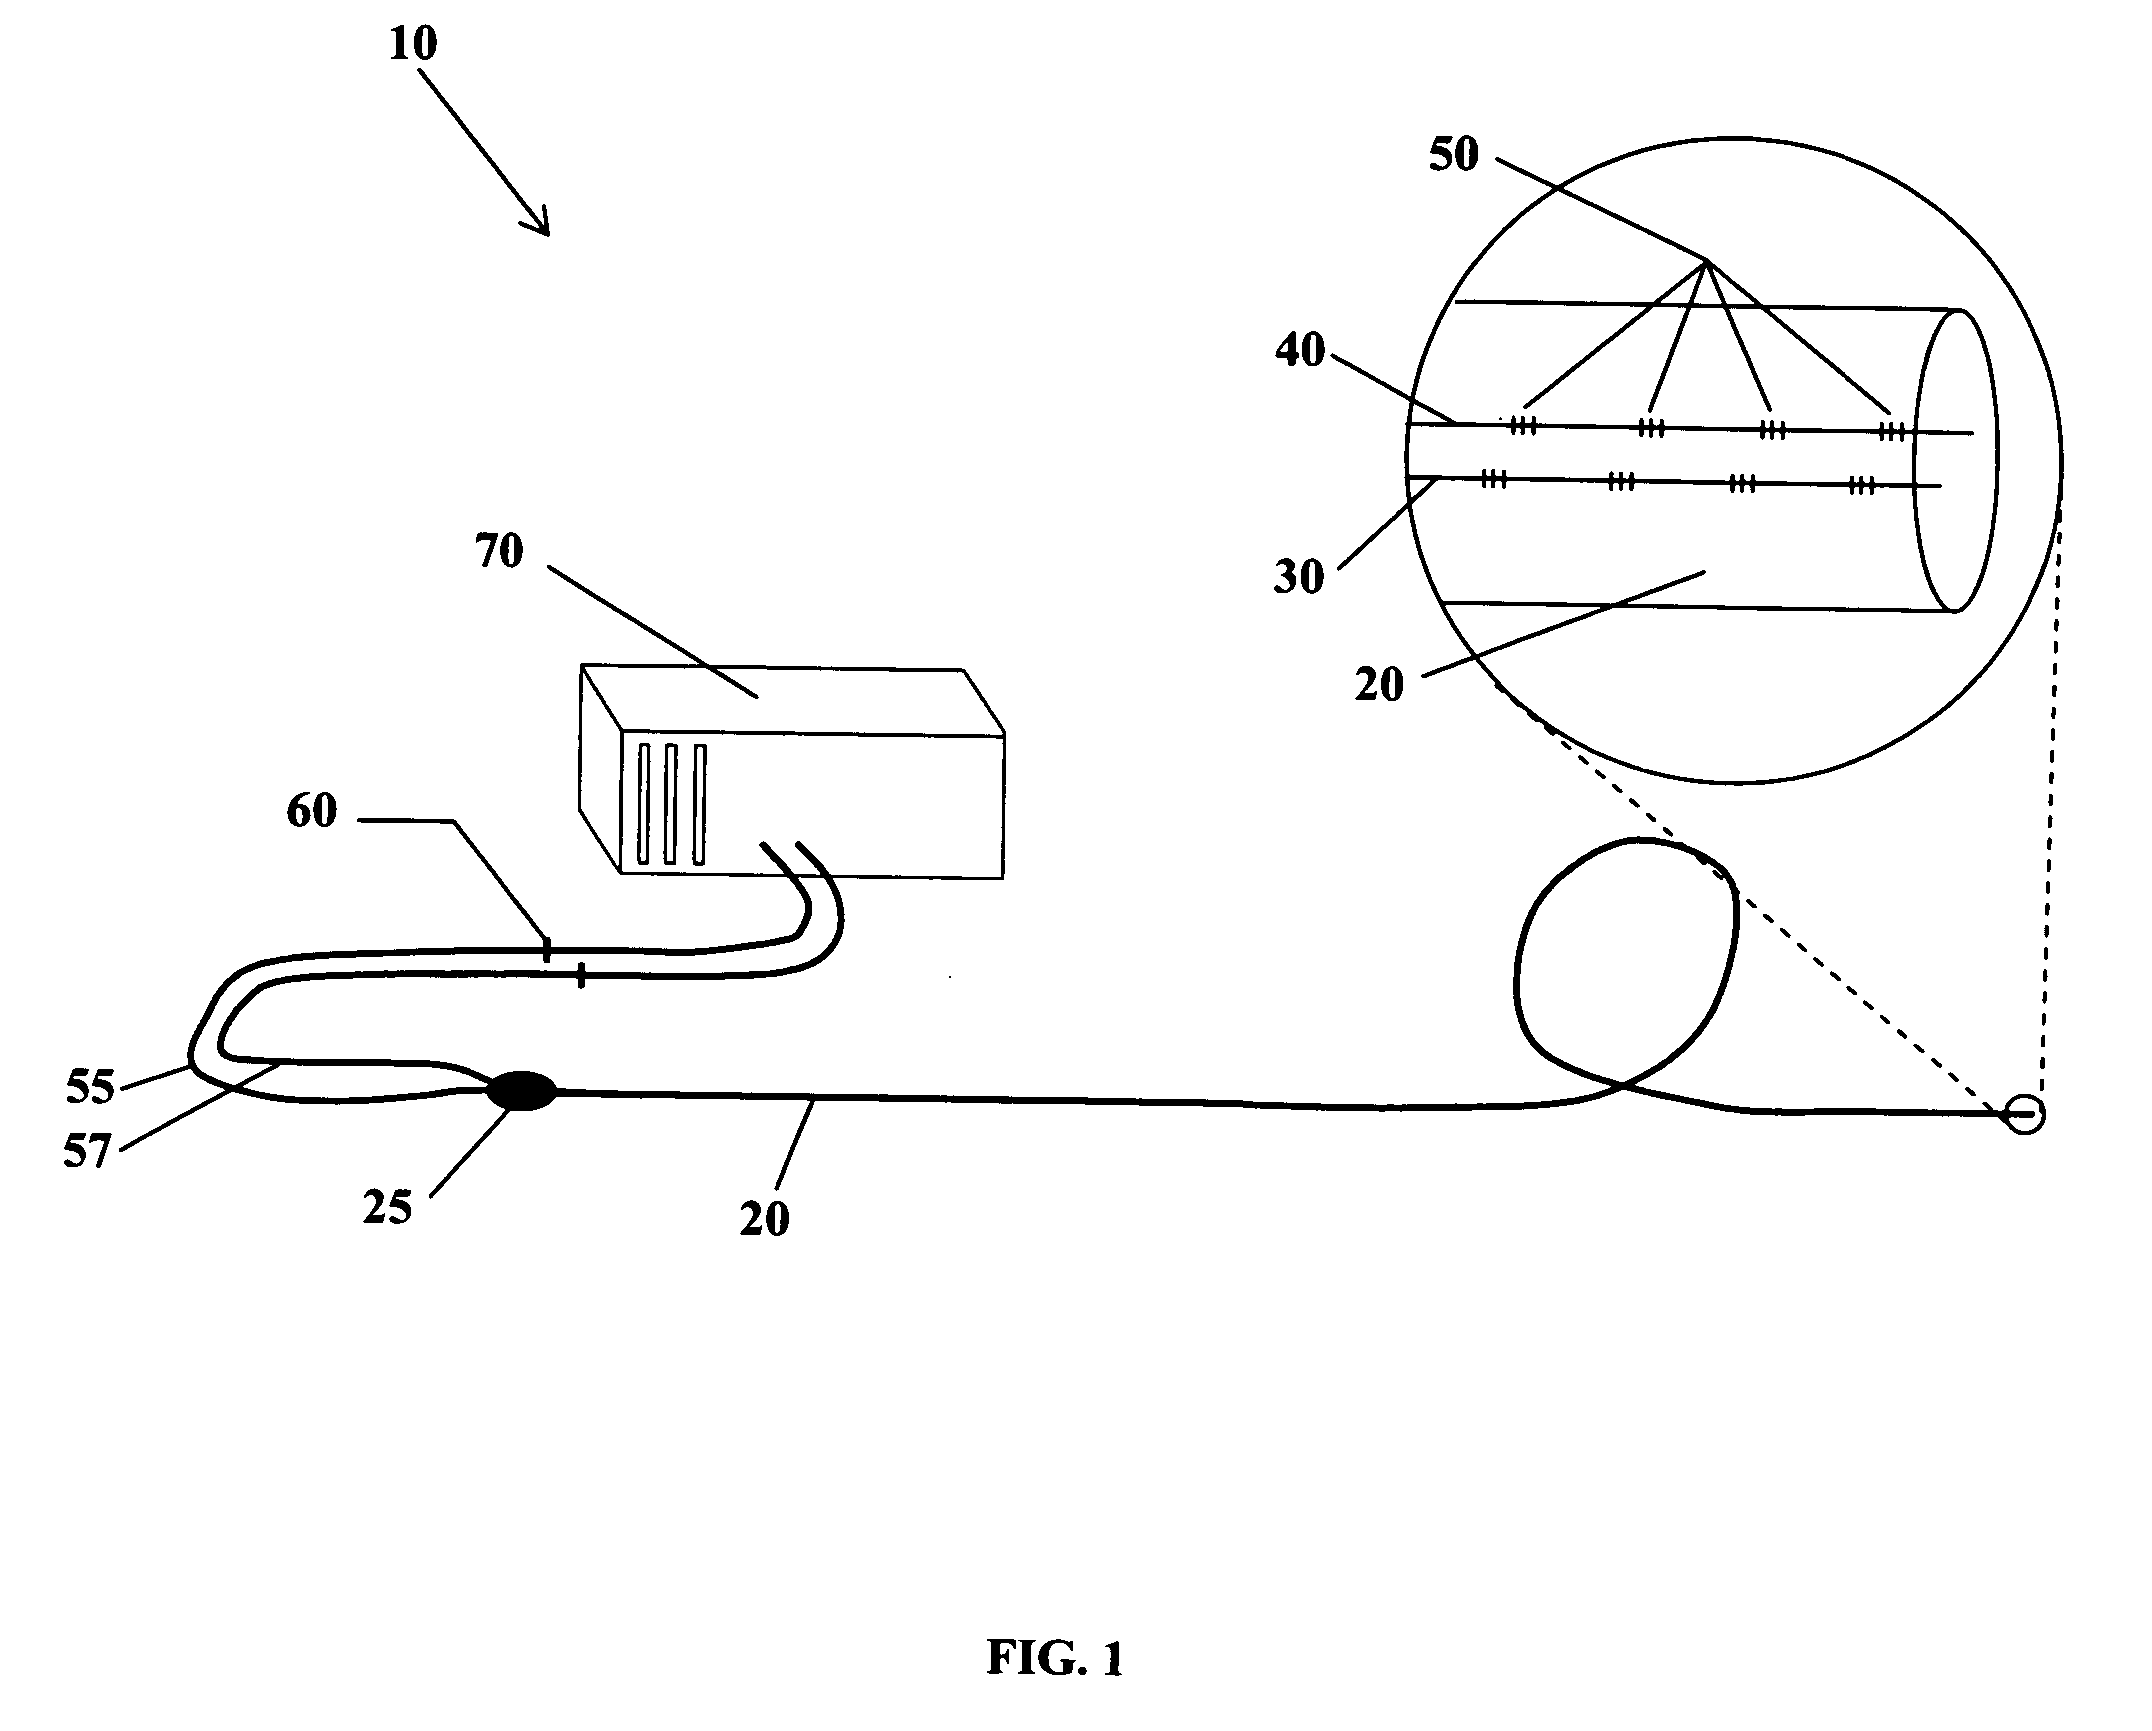 Fiber optic position and shape sensing device and method relating thereto